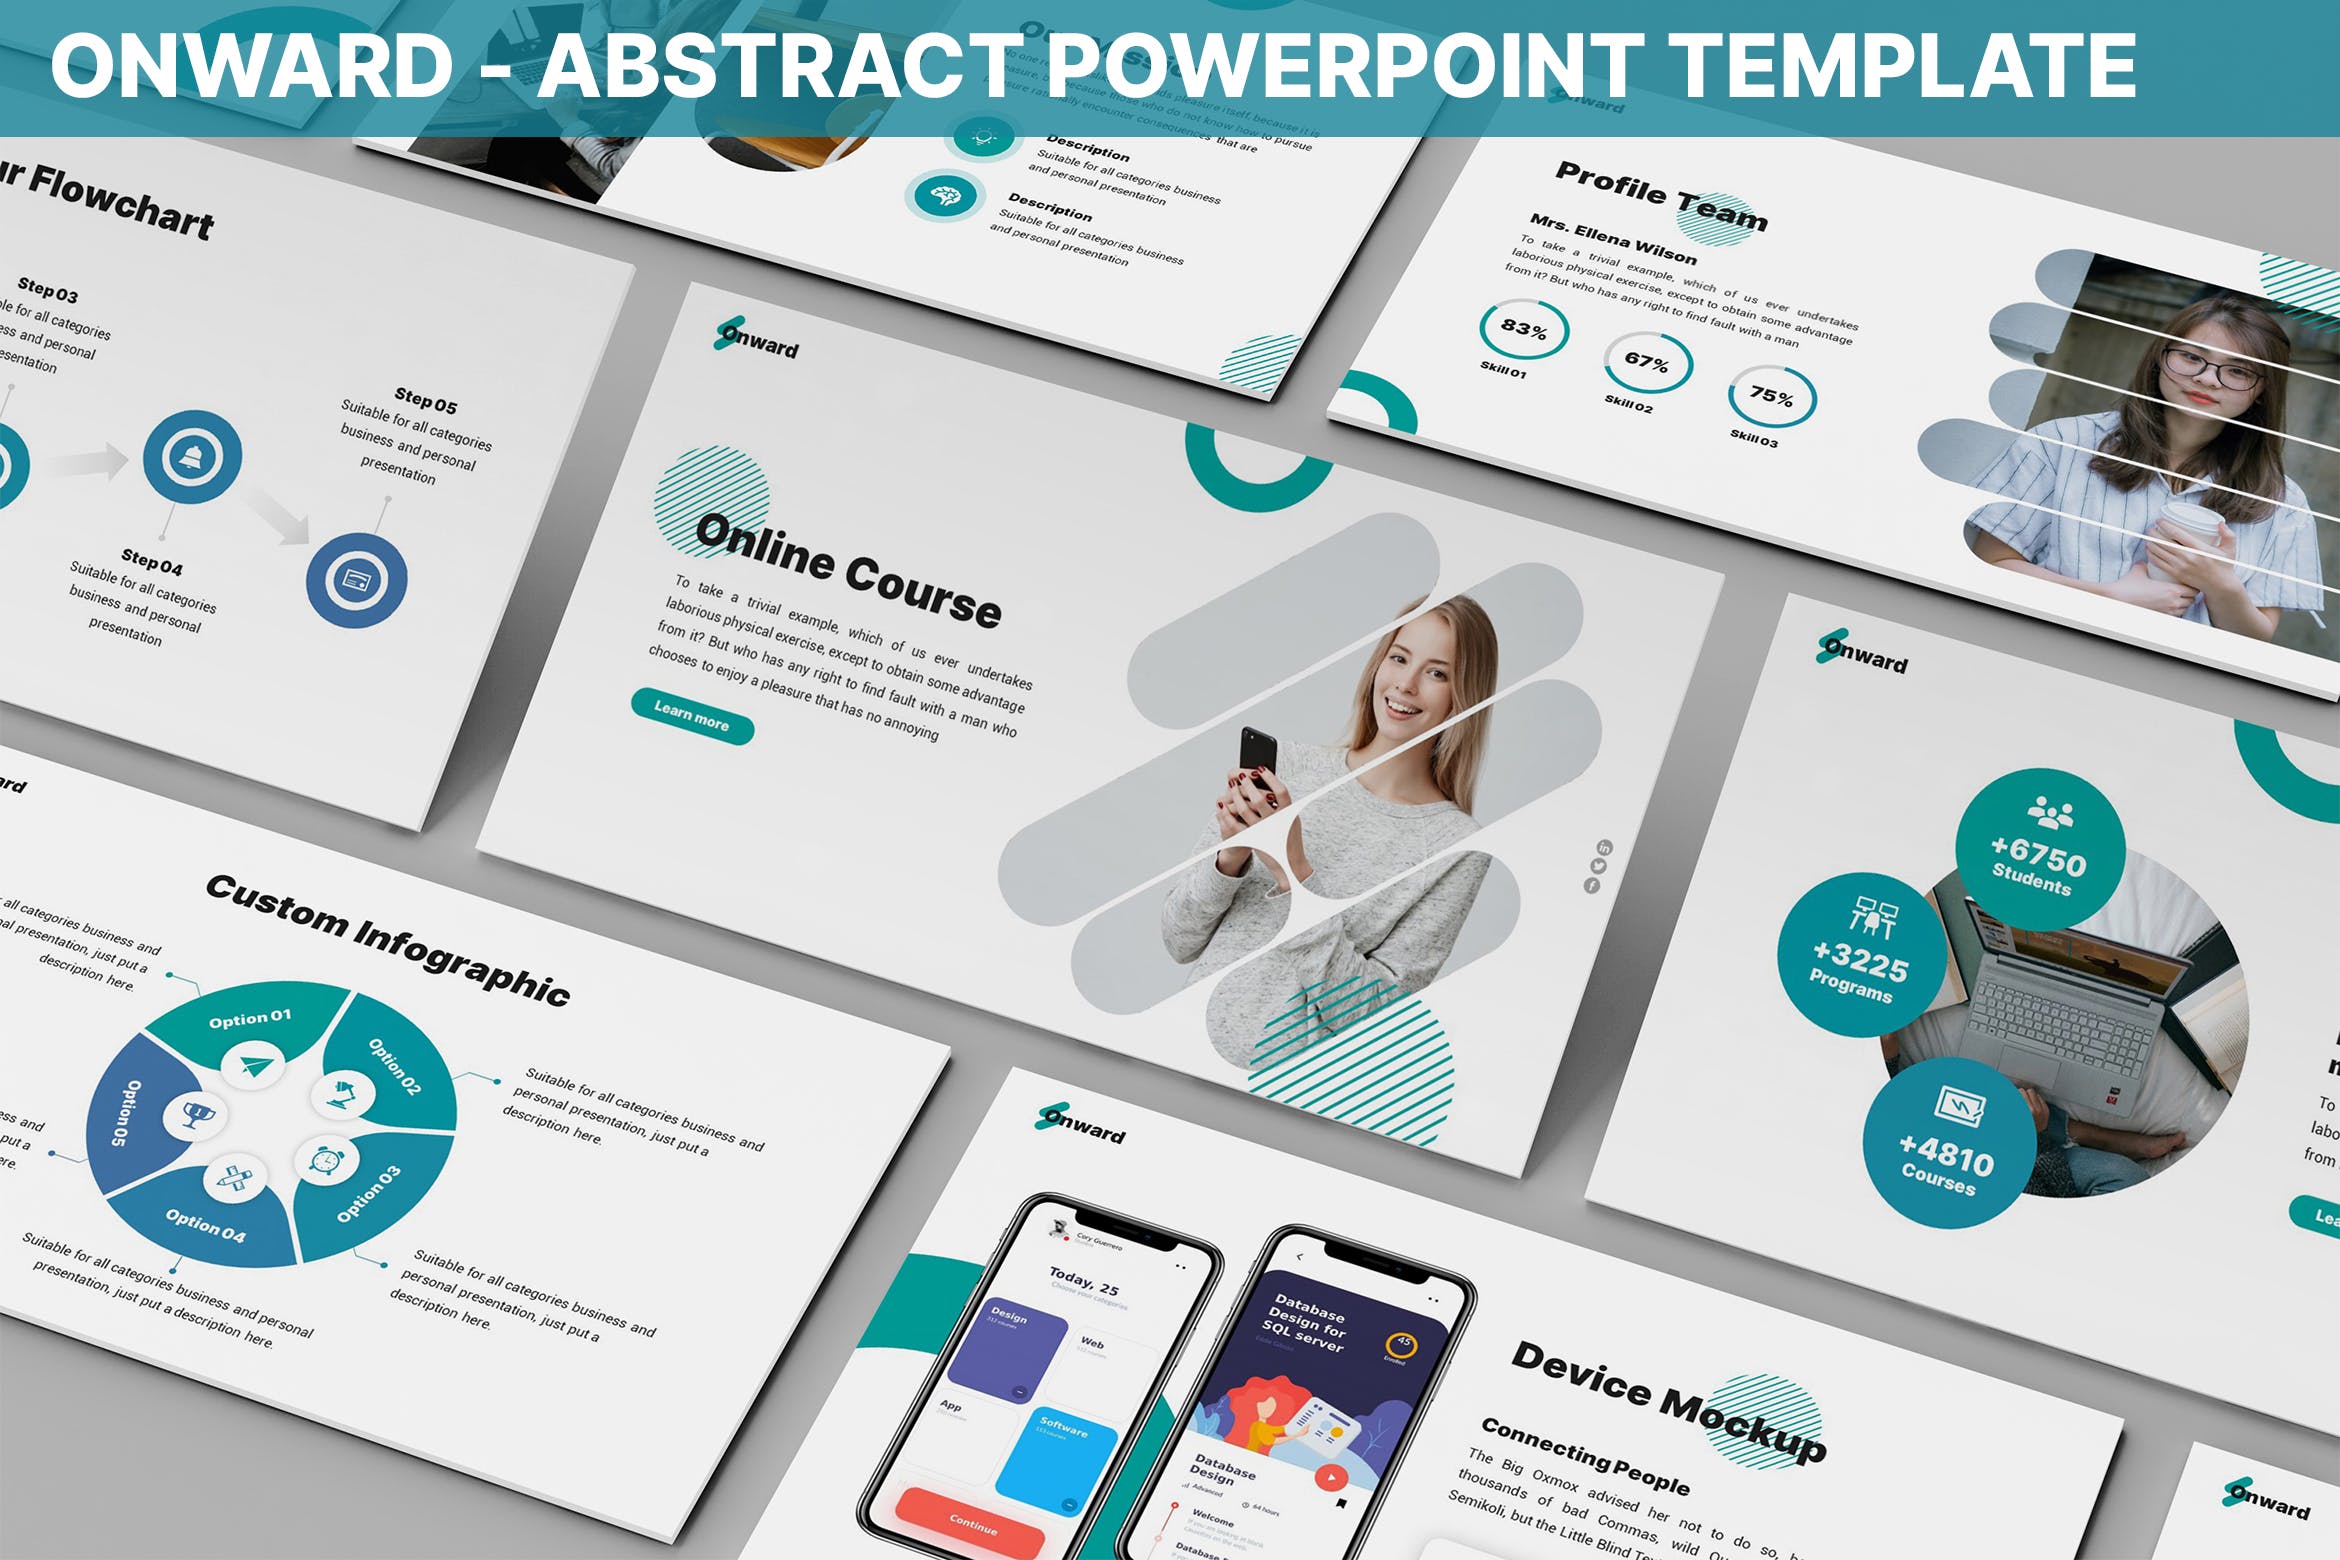 Cover image of Onward - Abstract Powerpoint Template.